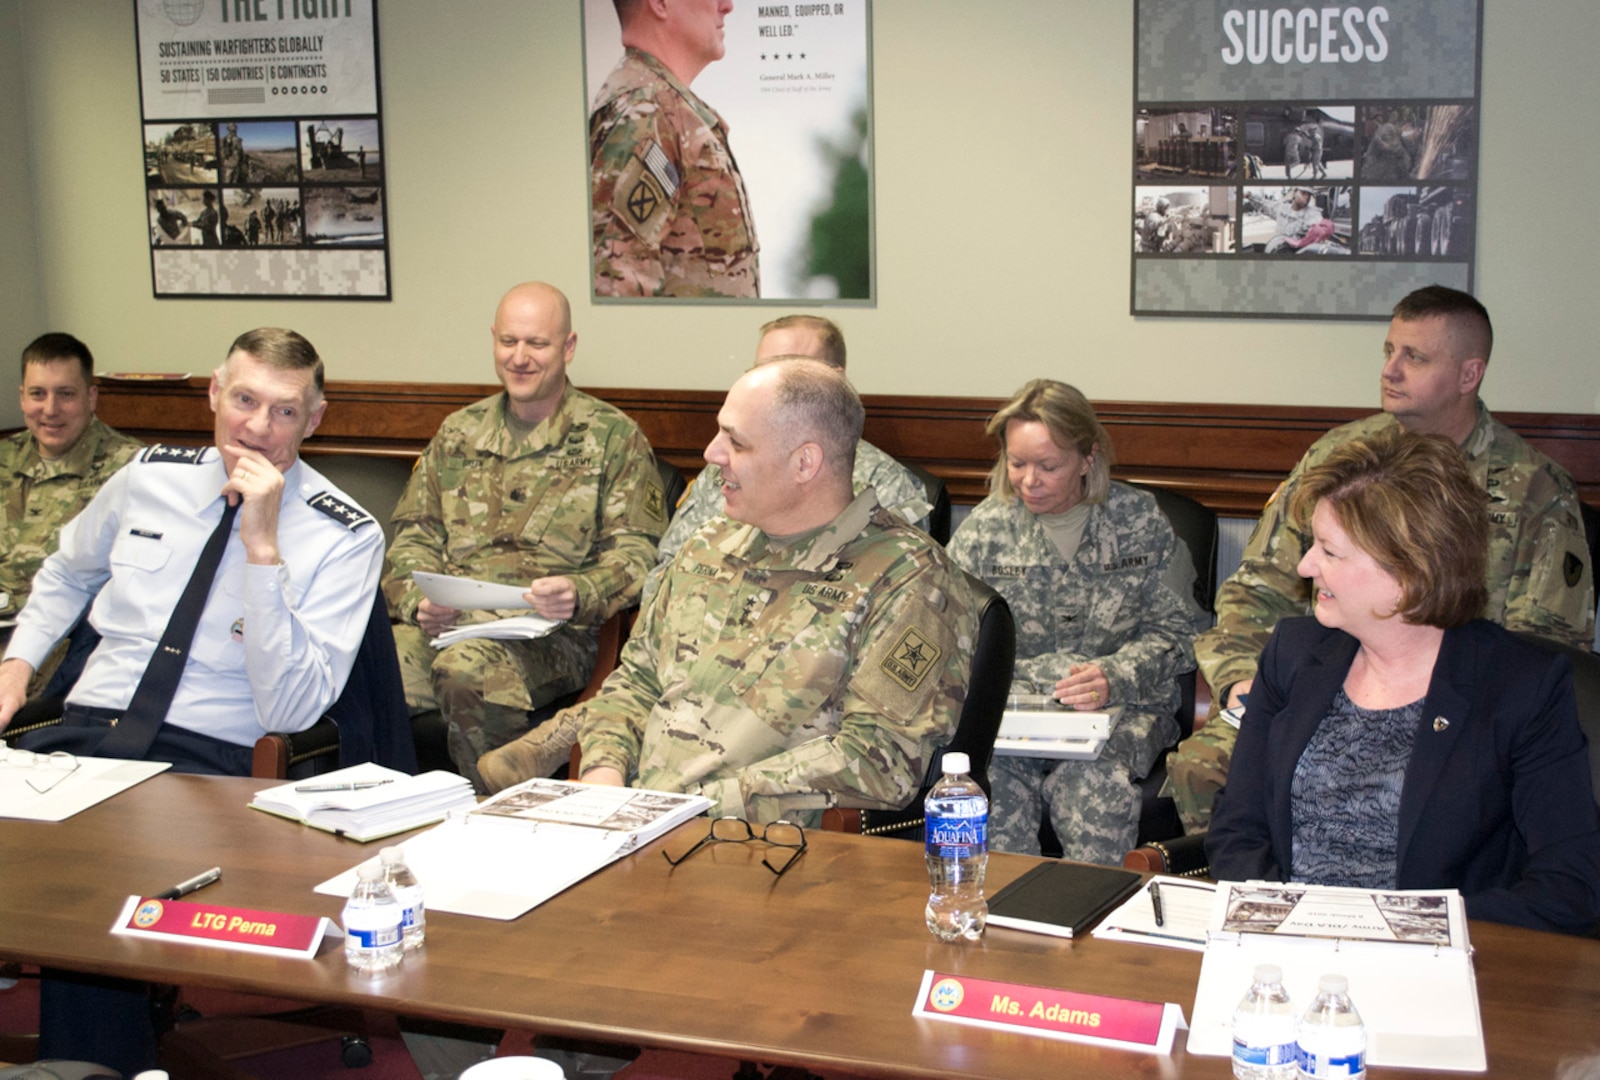 DLA Director Air Force Lt. Gen. Andy Busch (far left, front) discusses equipment and budget reductions with Army officials during Army/DLA Day at the Pentagon March 8.